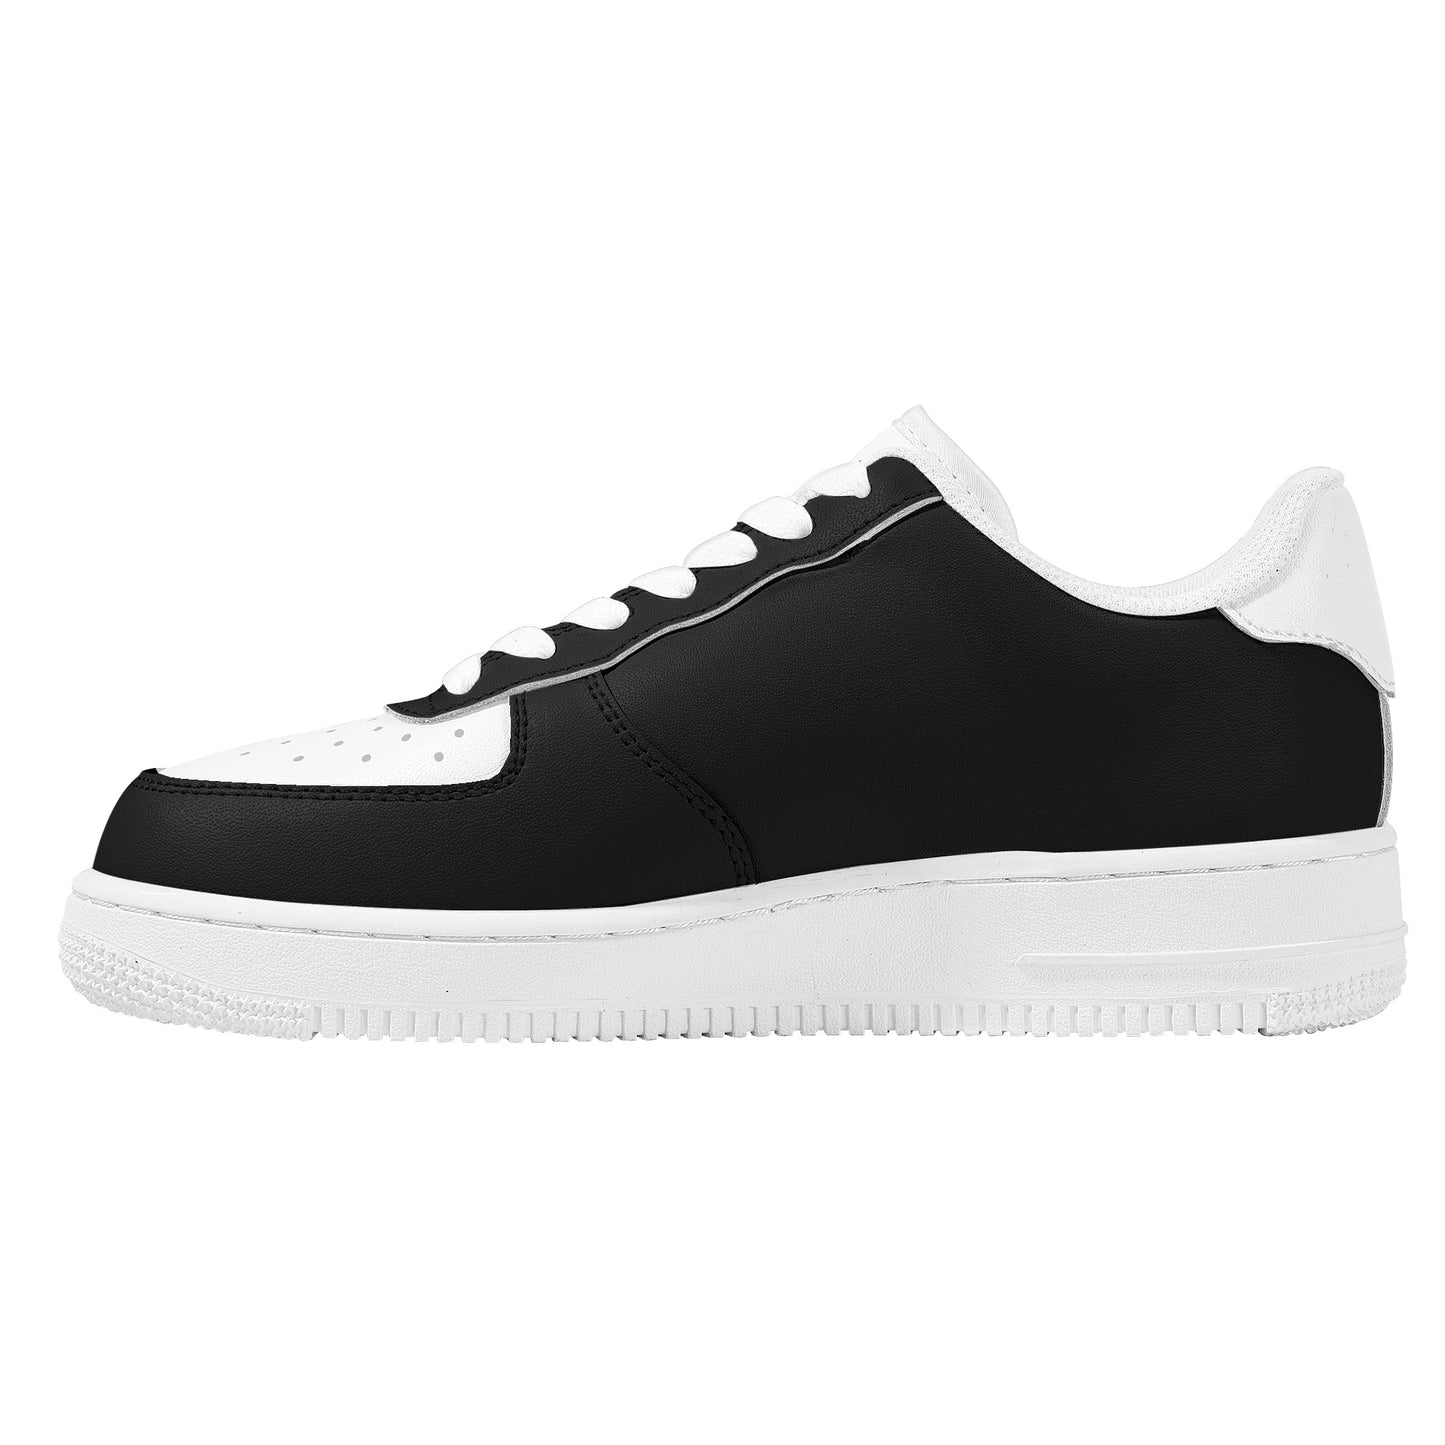 Black and White Men Vegan Leather Shoes, Sneakers Low Top Lace Up Custom Designer Flat Casual Designer Handmade Trainers